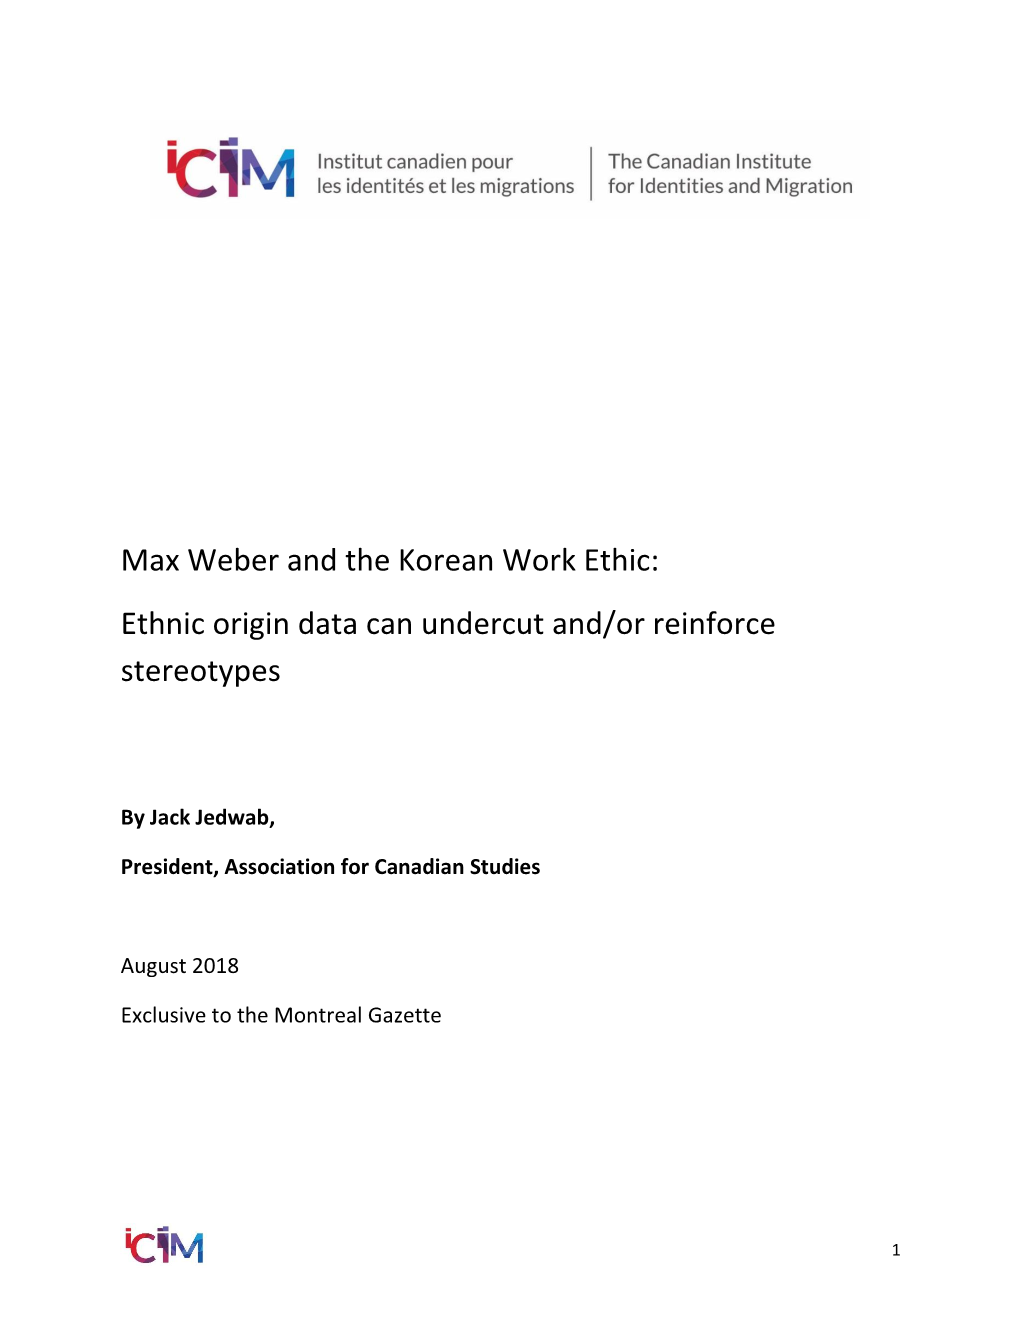 Max Weber and the Korean Work Ethic: Ethnic Origin Data Can Undercut And/Or Reinforce Stereotypes